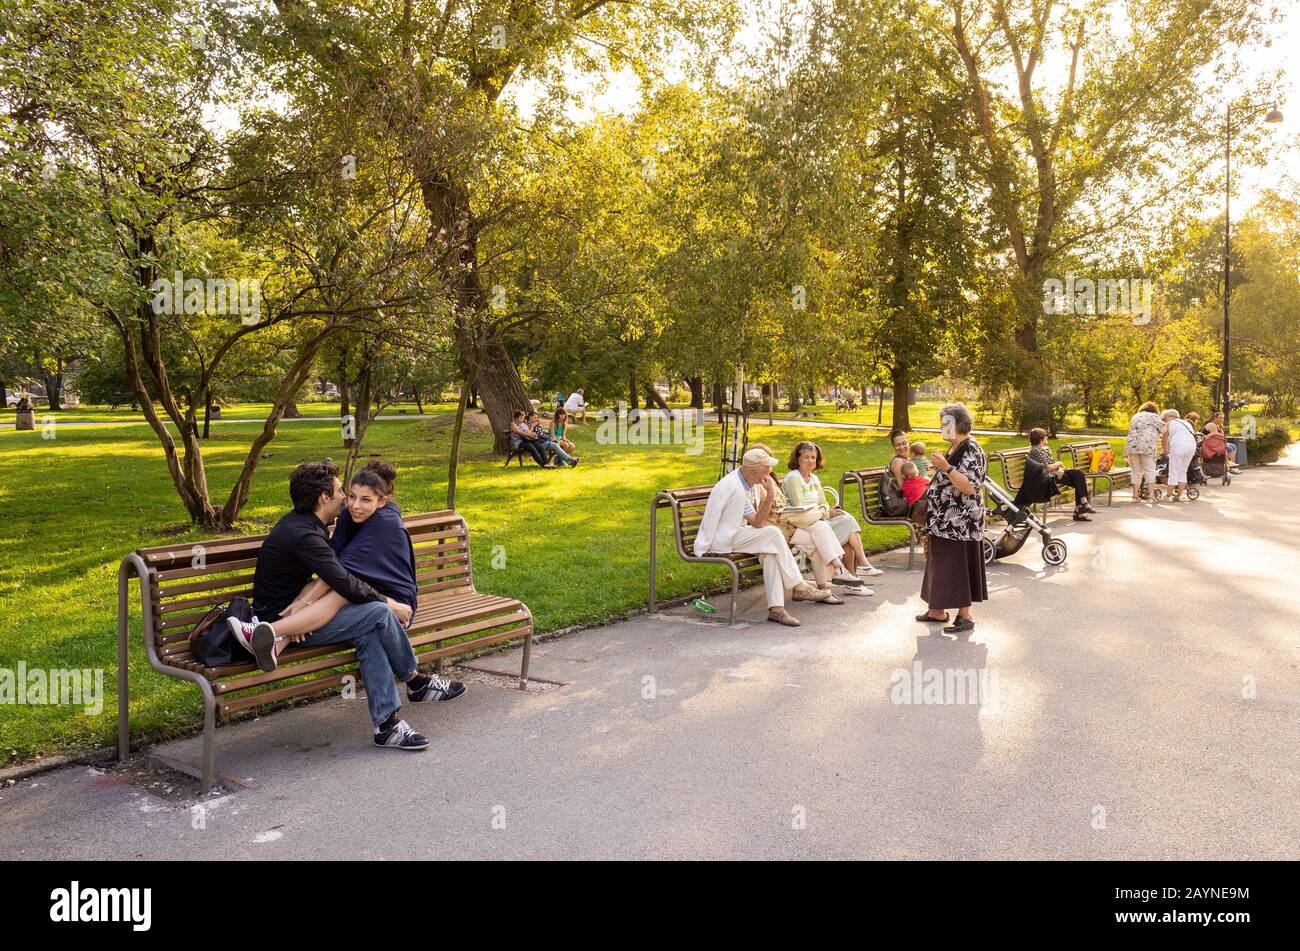 Young and old people in Zaimov Park, Sofia, Bulgaria Stock Photo